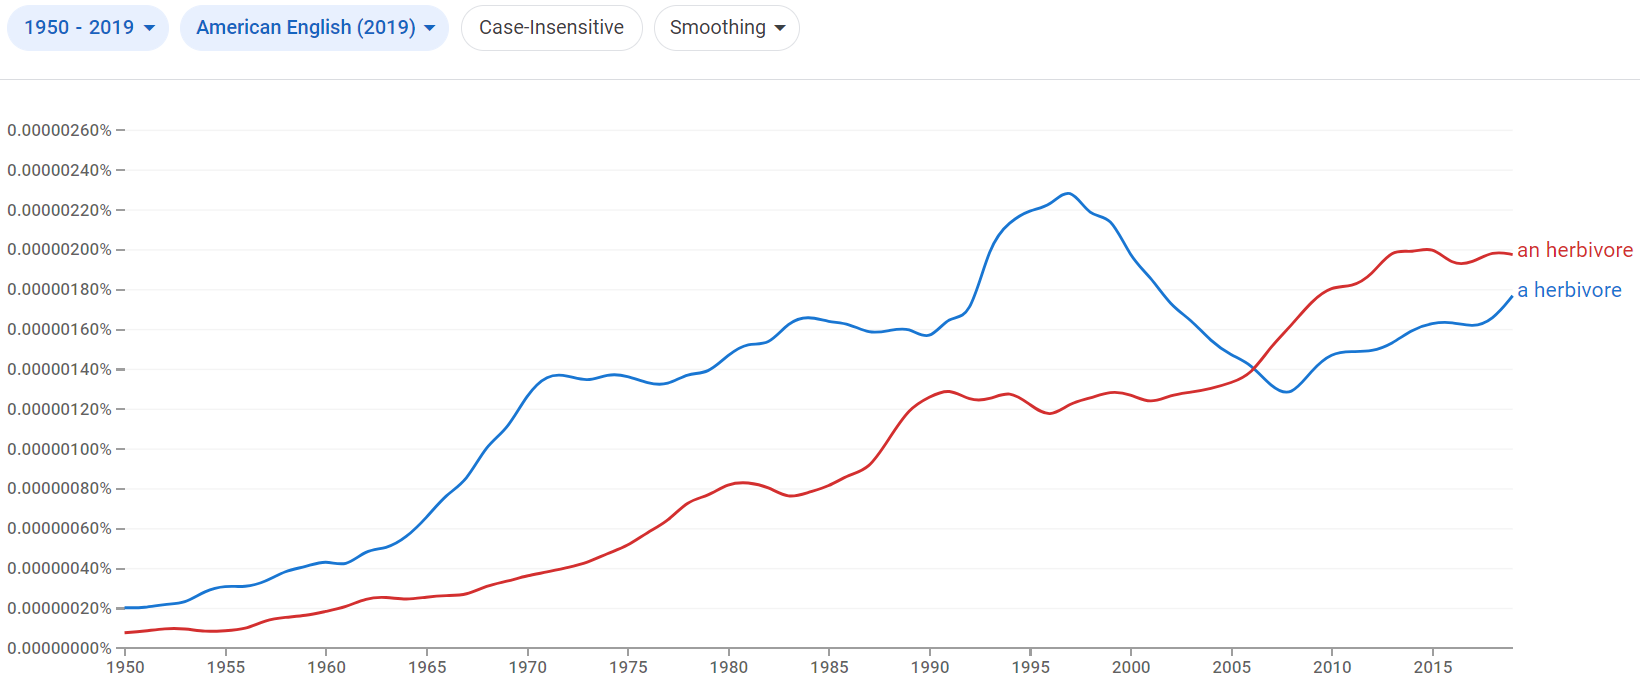 Relative frequency of the phrases a herbivore and an herbivore in American English